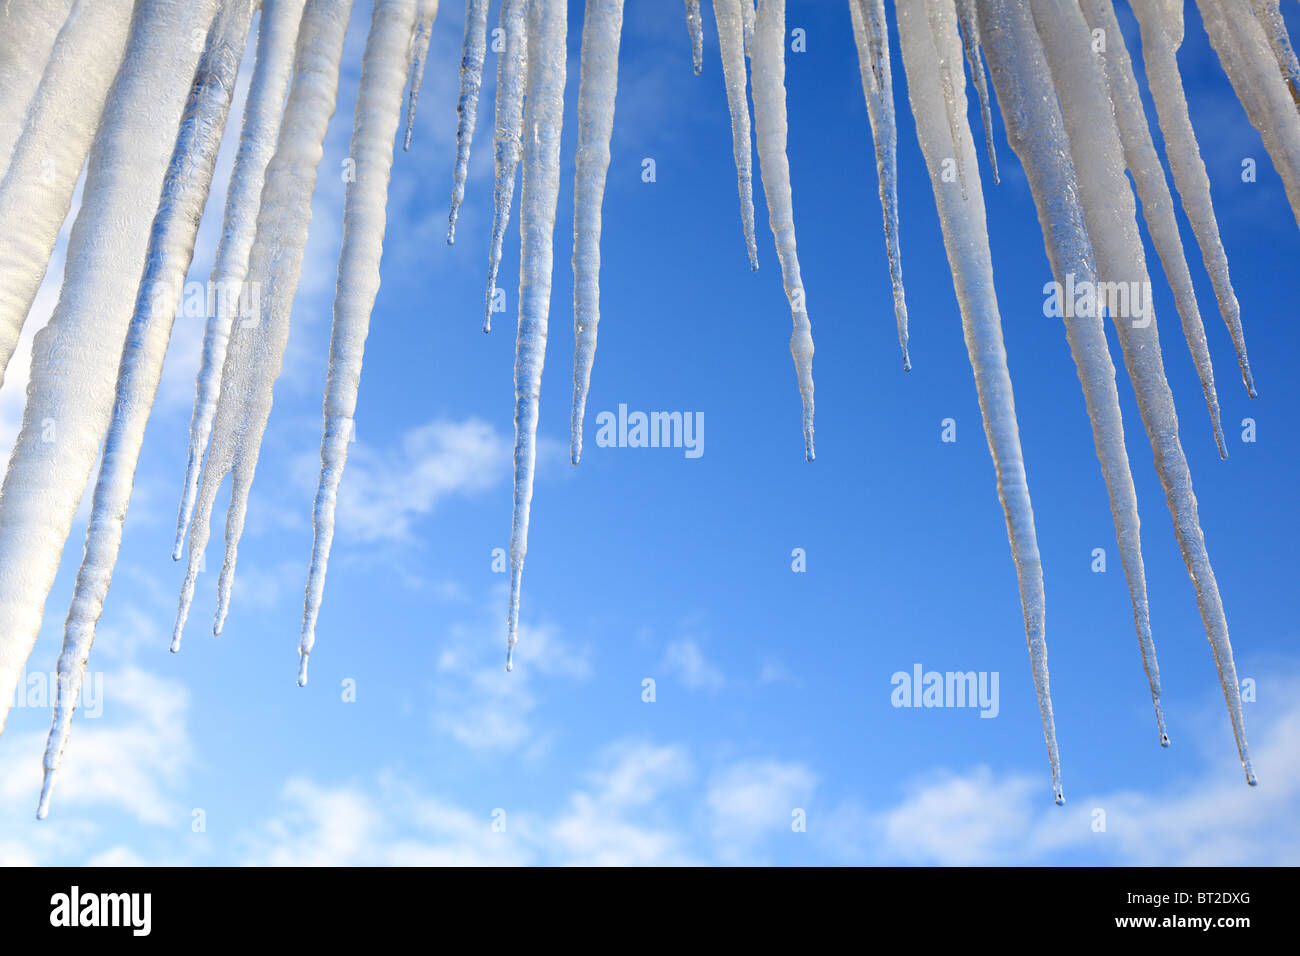 Icicles hanging against a blue sky Stock Photo